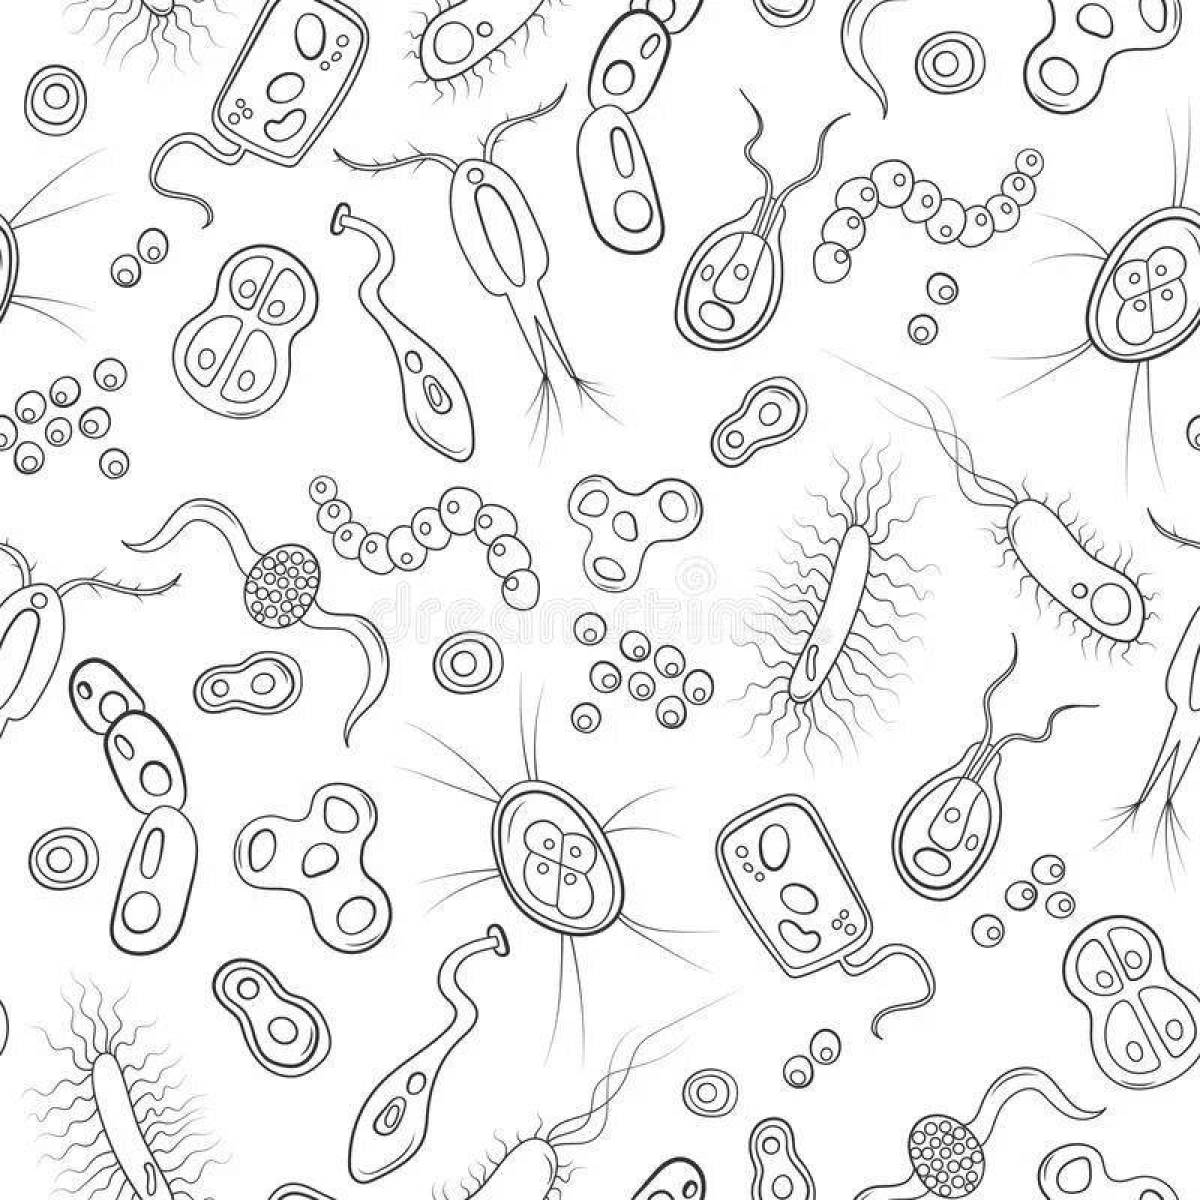 Adorable bacteria coloring page